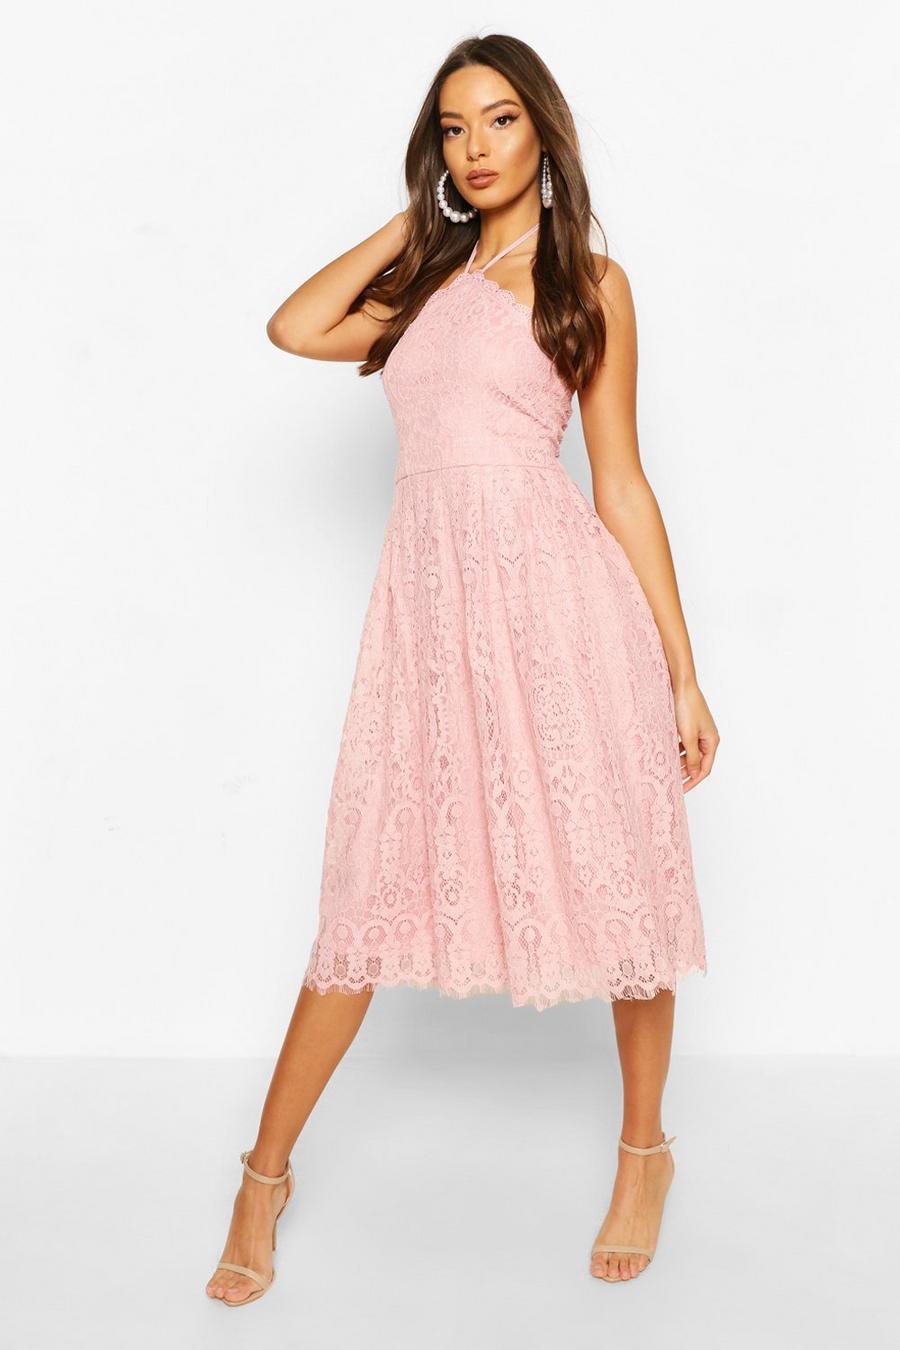 Soft pink Occasion Lace Full Skater Midi Dress